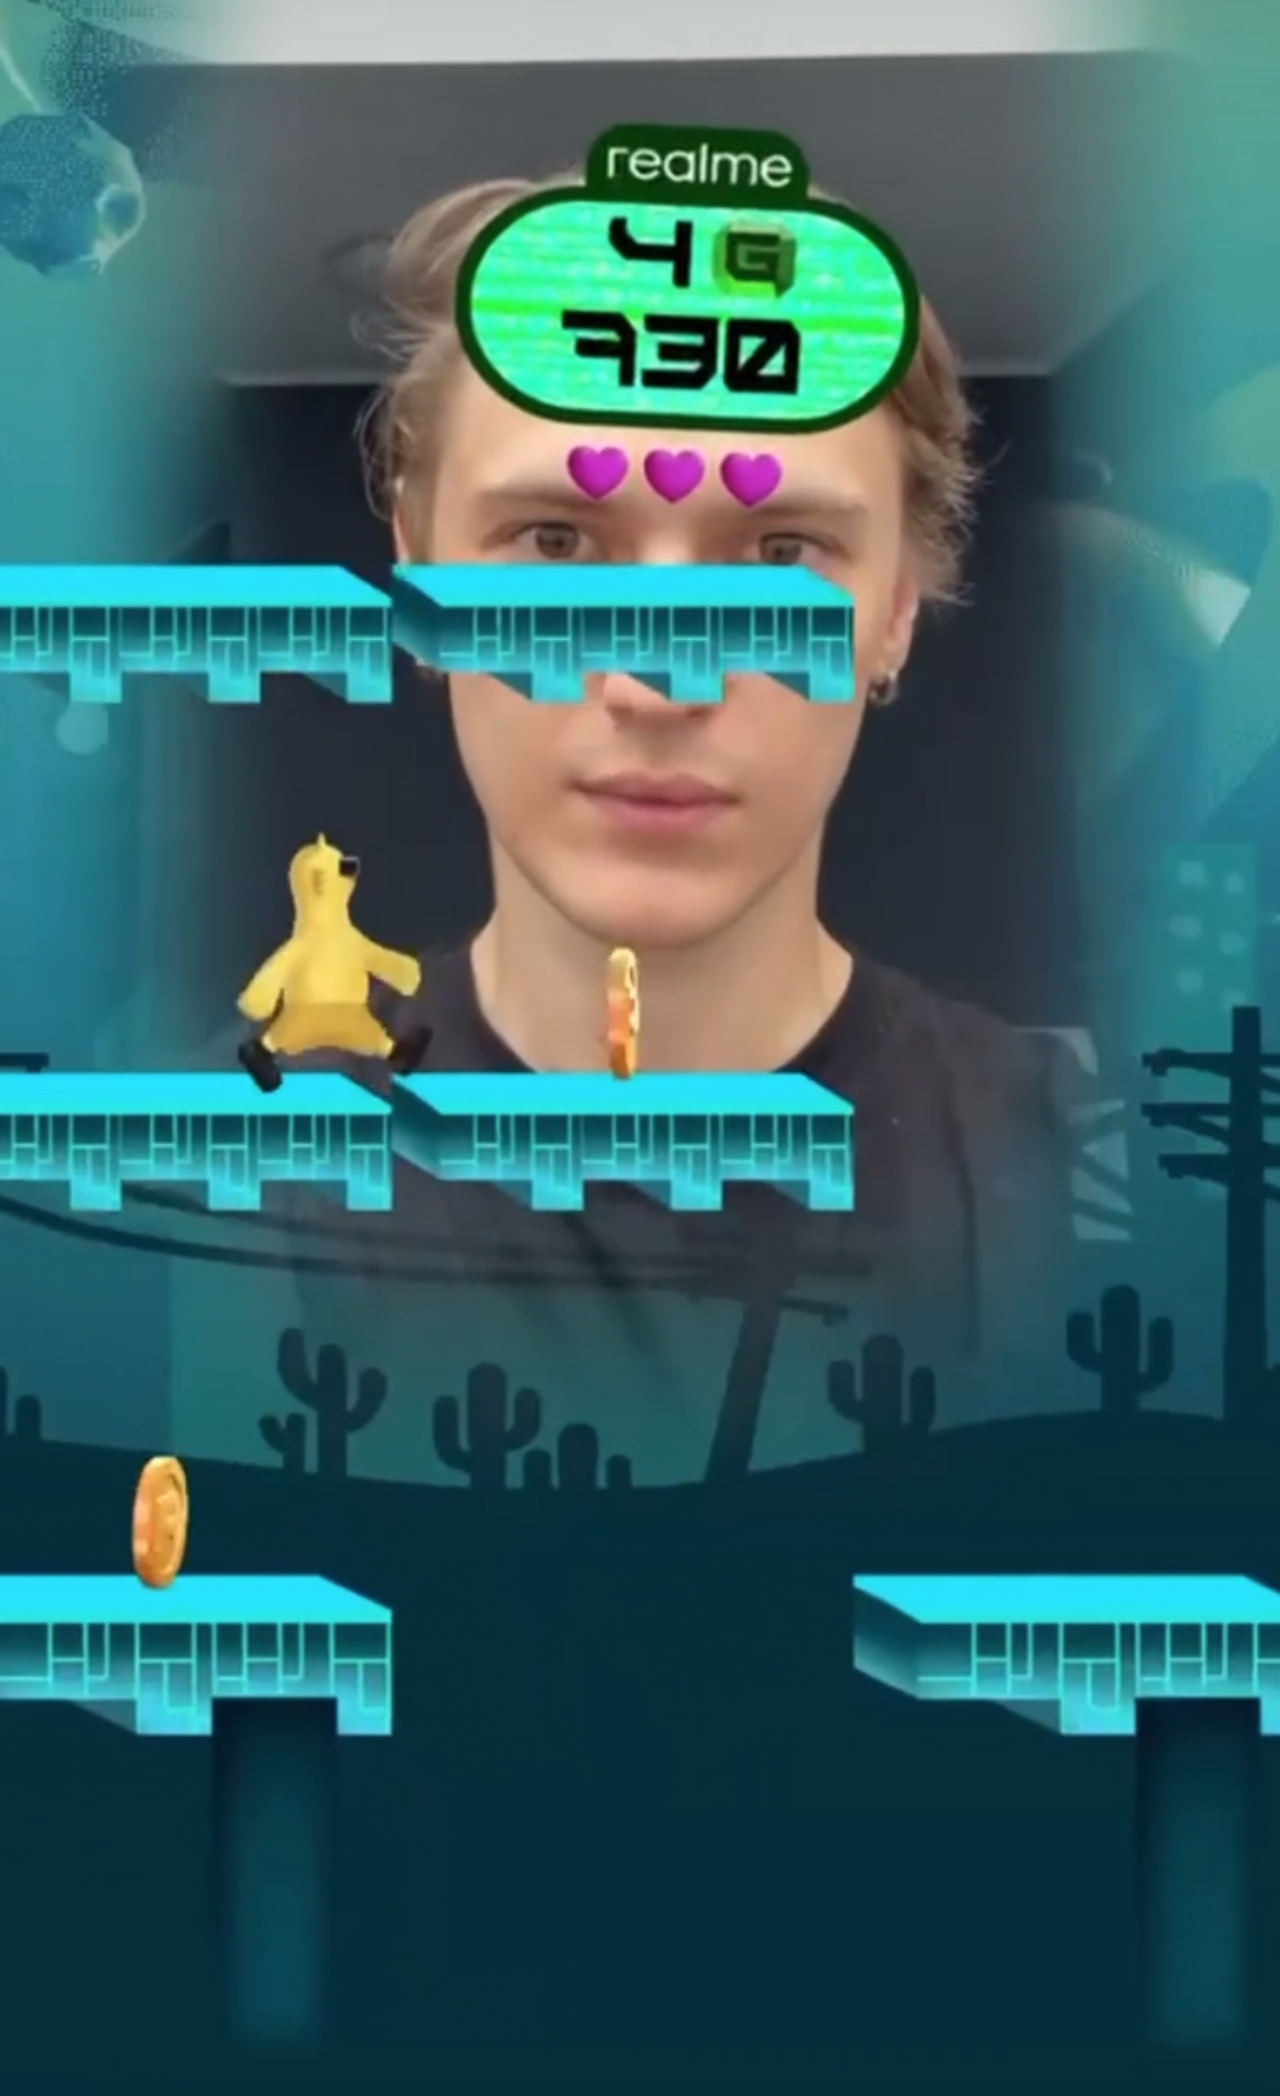 A screenshot of AR advertising gameplay, where head-tracking AR technology enables social media users to navigate the character's journey, visually depicting the transition from 1G to 5G technology.